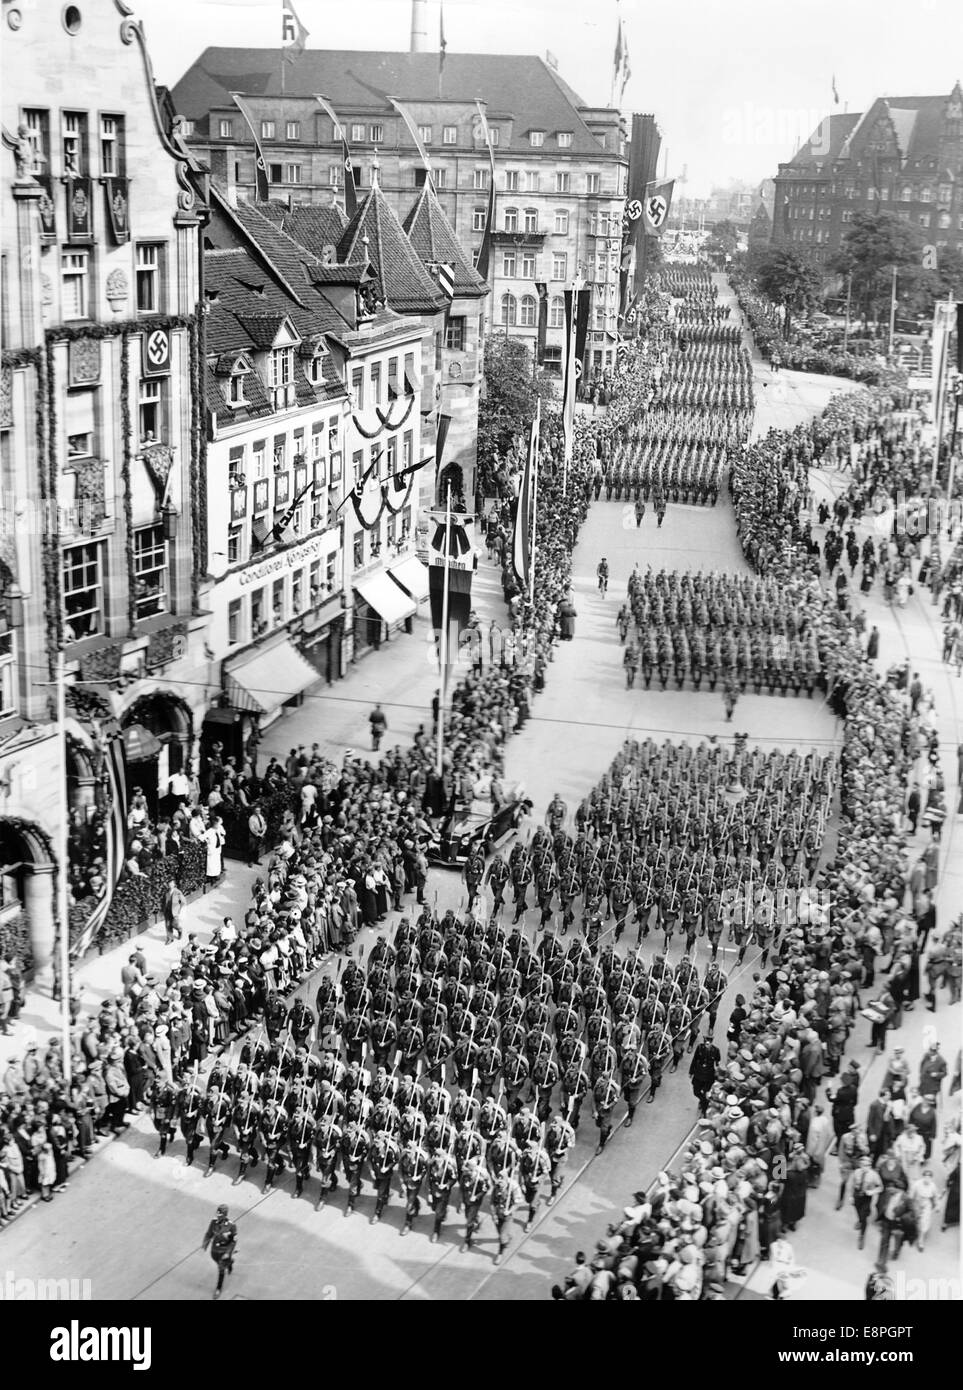 Nuremberg Rally 1936 in Nuremberg, Germany - Members of the Reich Labour Service (RAD) carry backpacks and spades as they march along Koenigstrasse and later past past Adolf Hitler at hotel 'Deutscher Hof'. (Flaws in quality due to the historic picture copy) Fotoarchiv für Zeitgeschichtee - NO WIRE SERVICE - Stock Photo